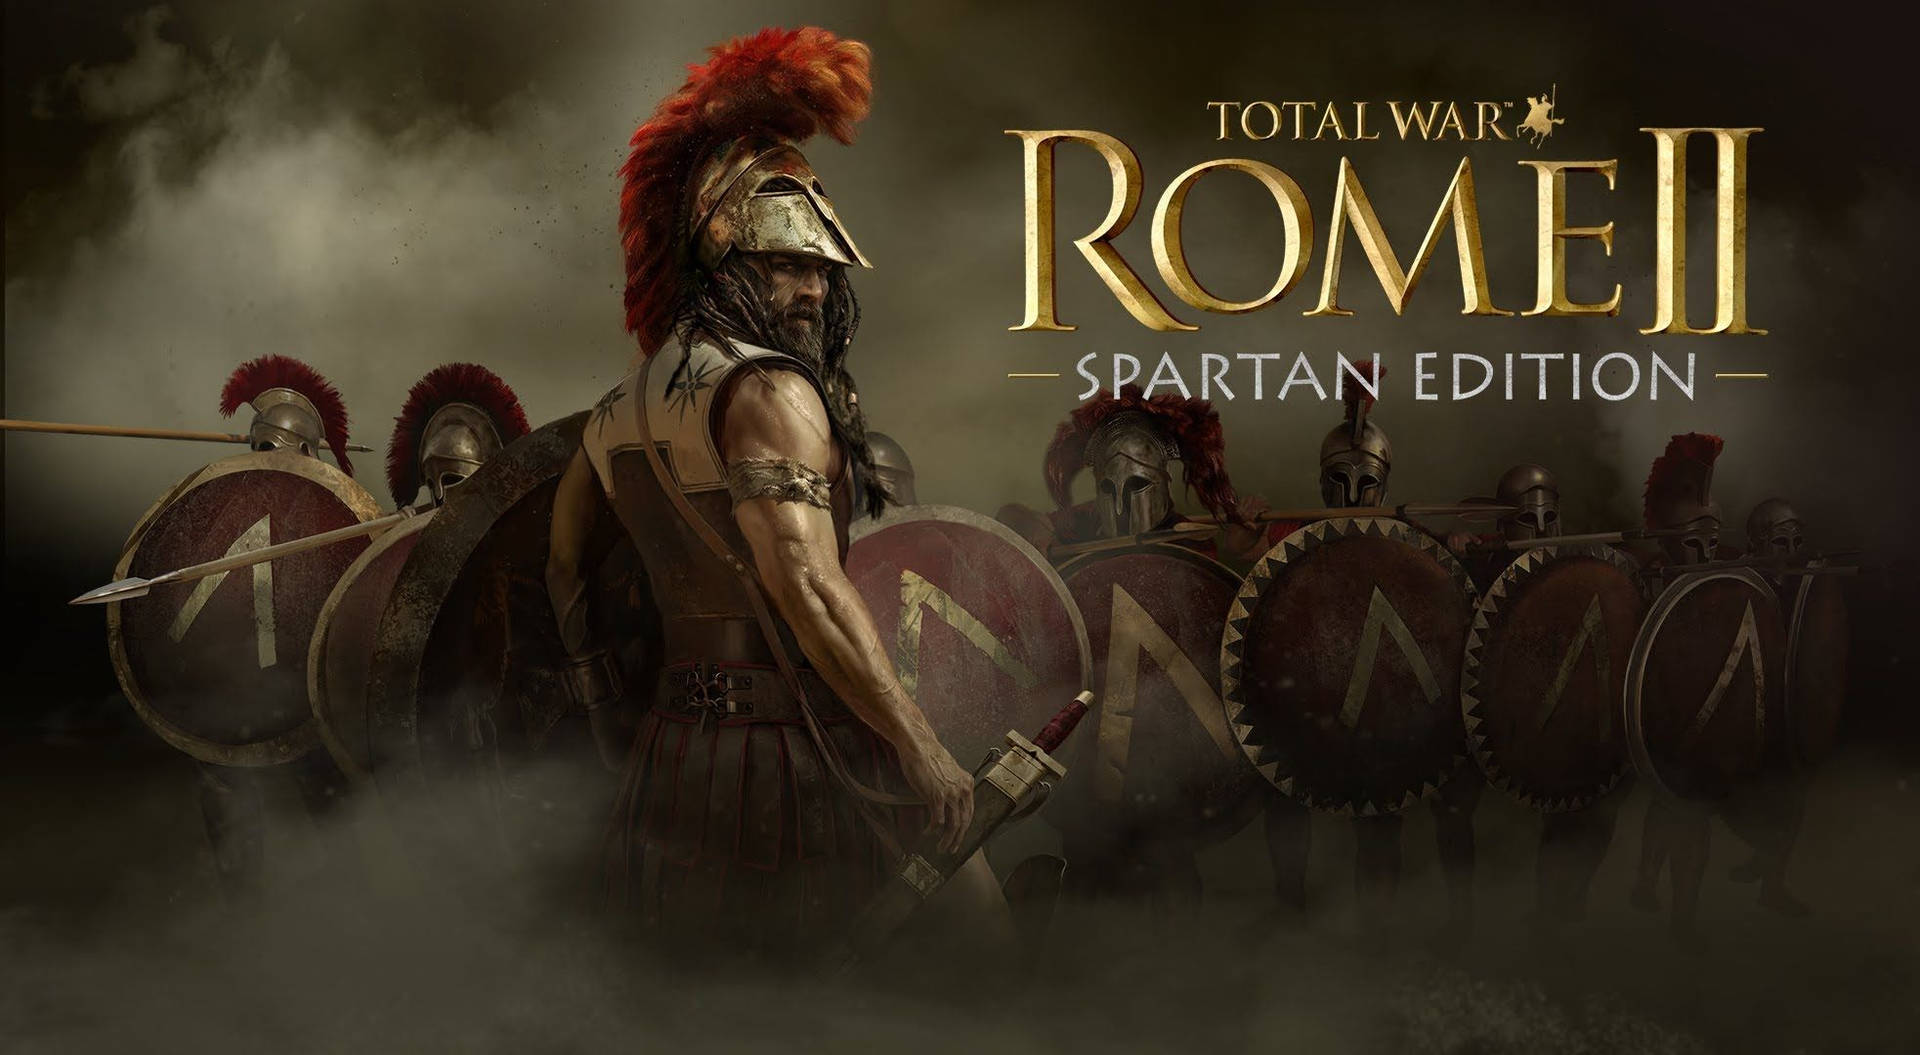 Rome 2 Spartan Edition Game Cover